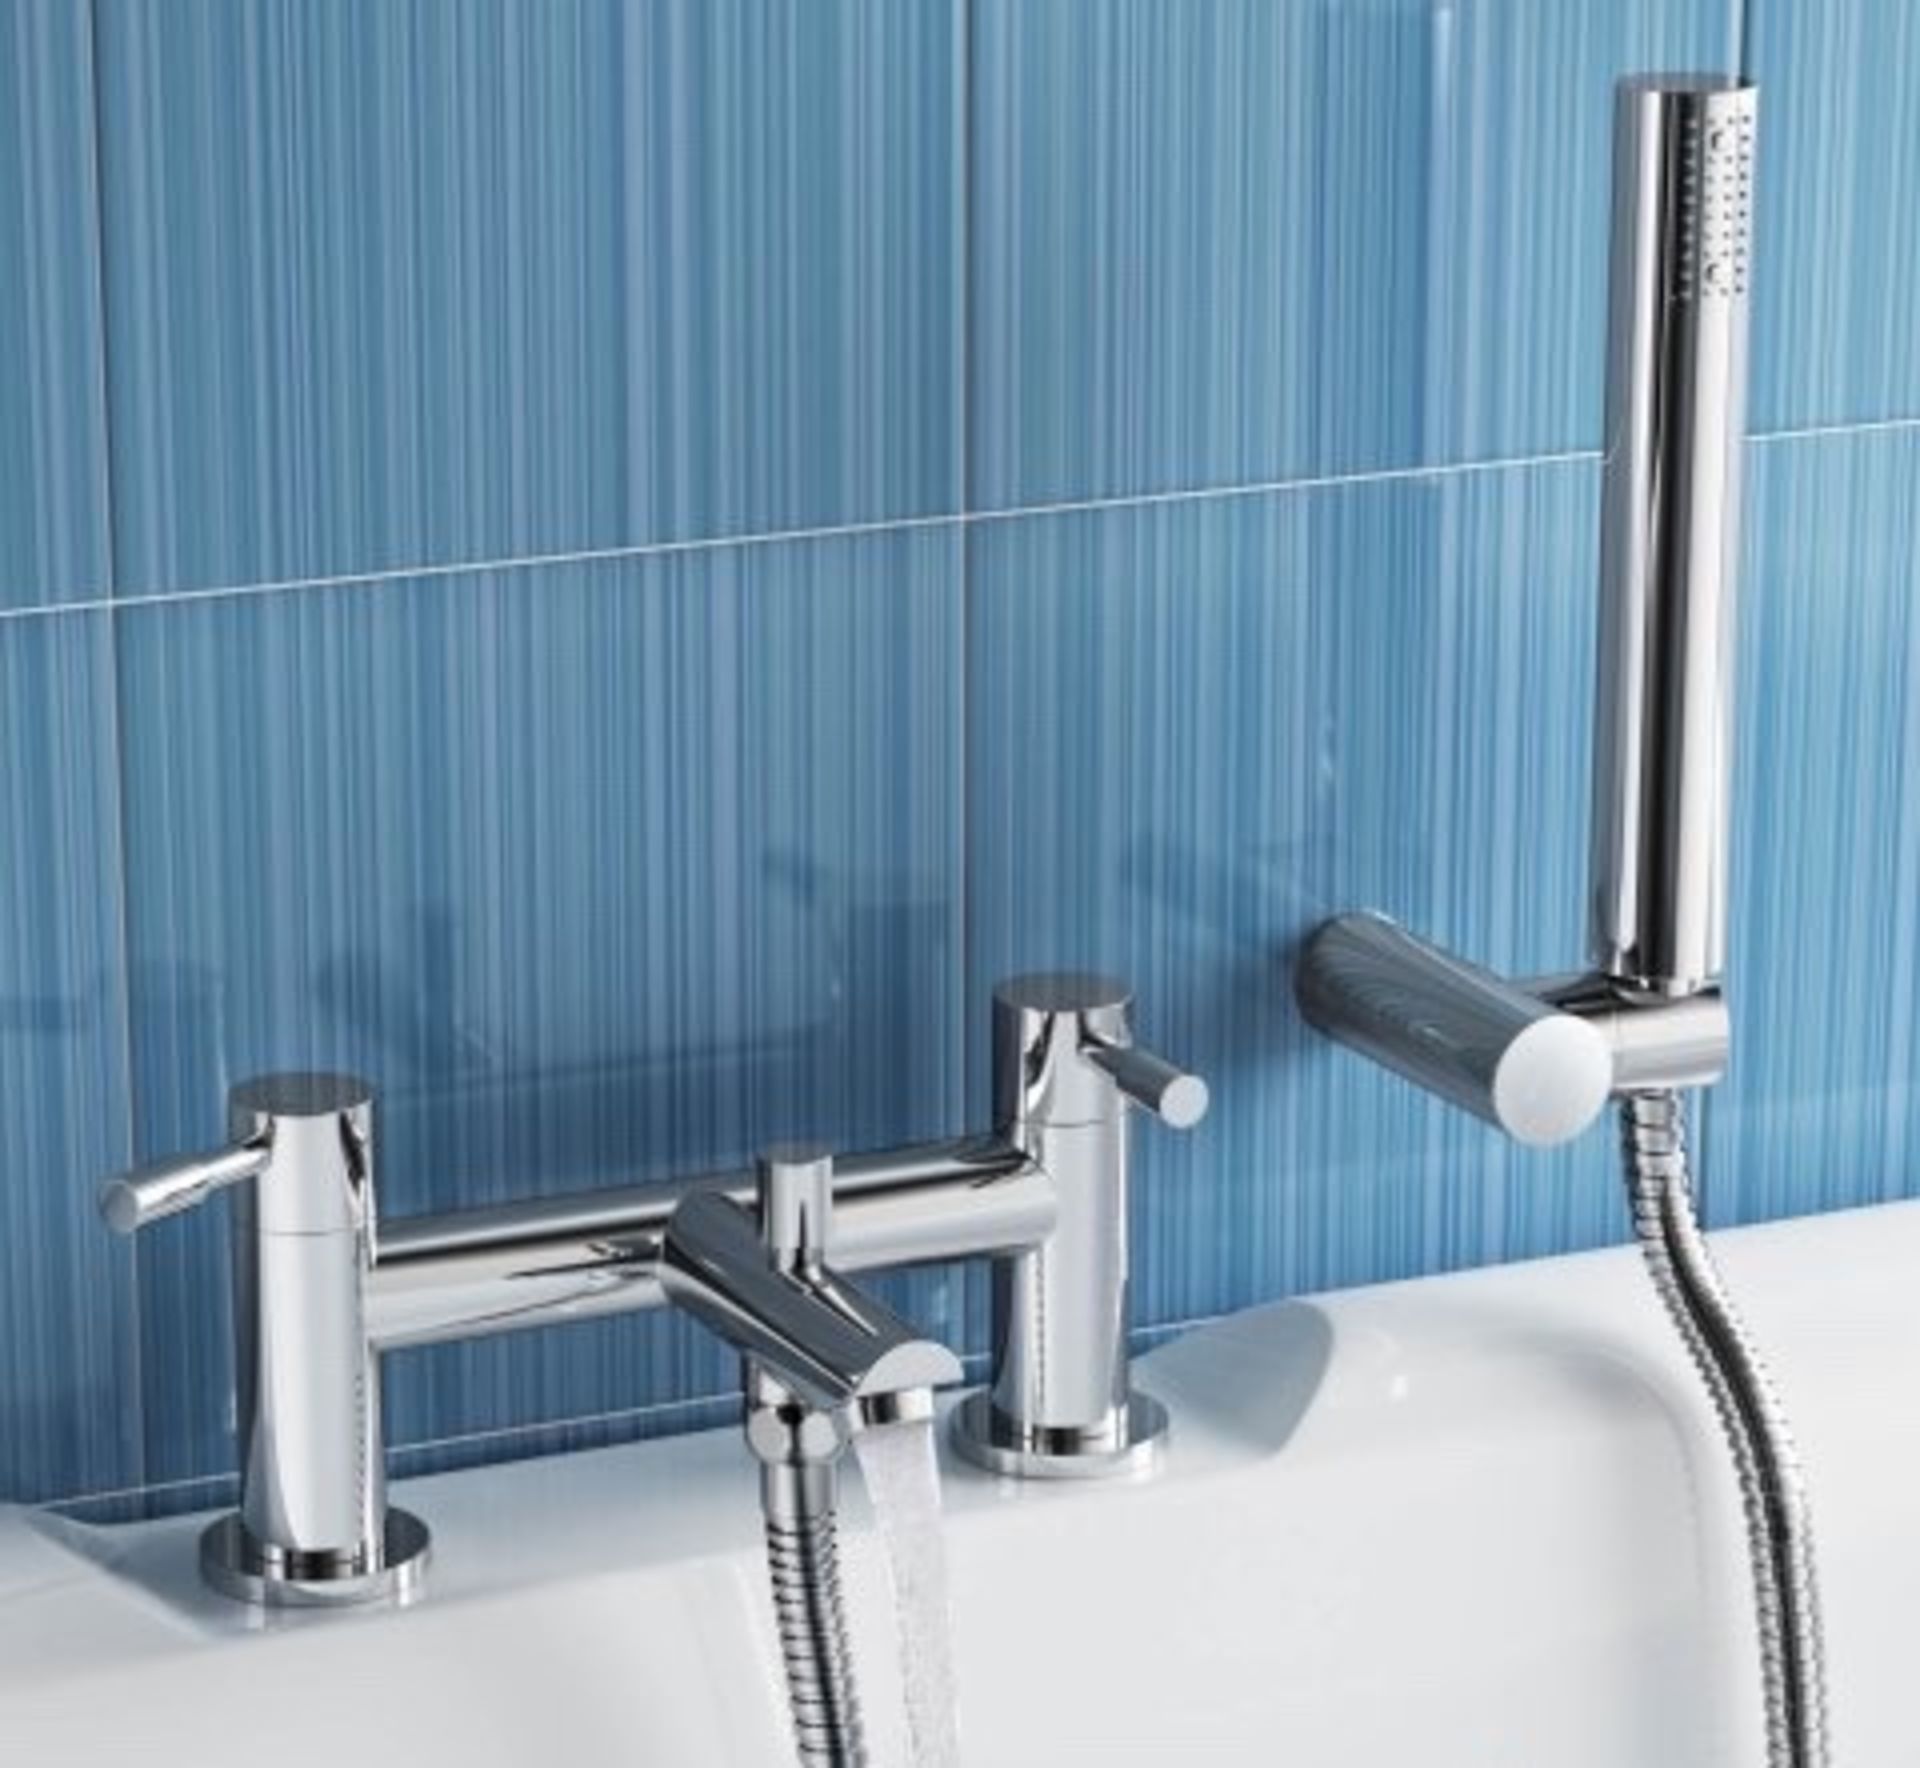 A28 - Gladstone Bath Mixer Shower Tap with Hand Held Presenting a contemporary design, this solid